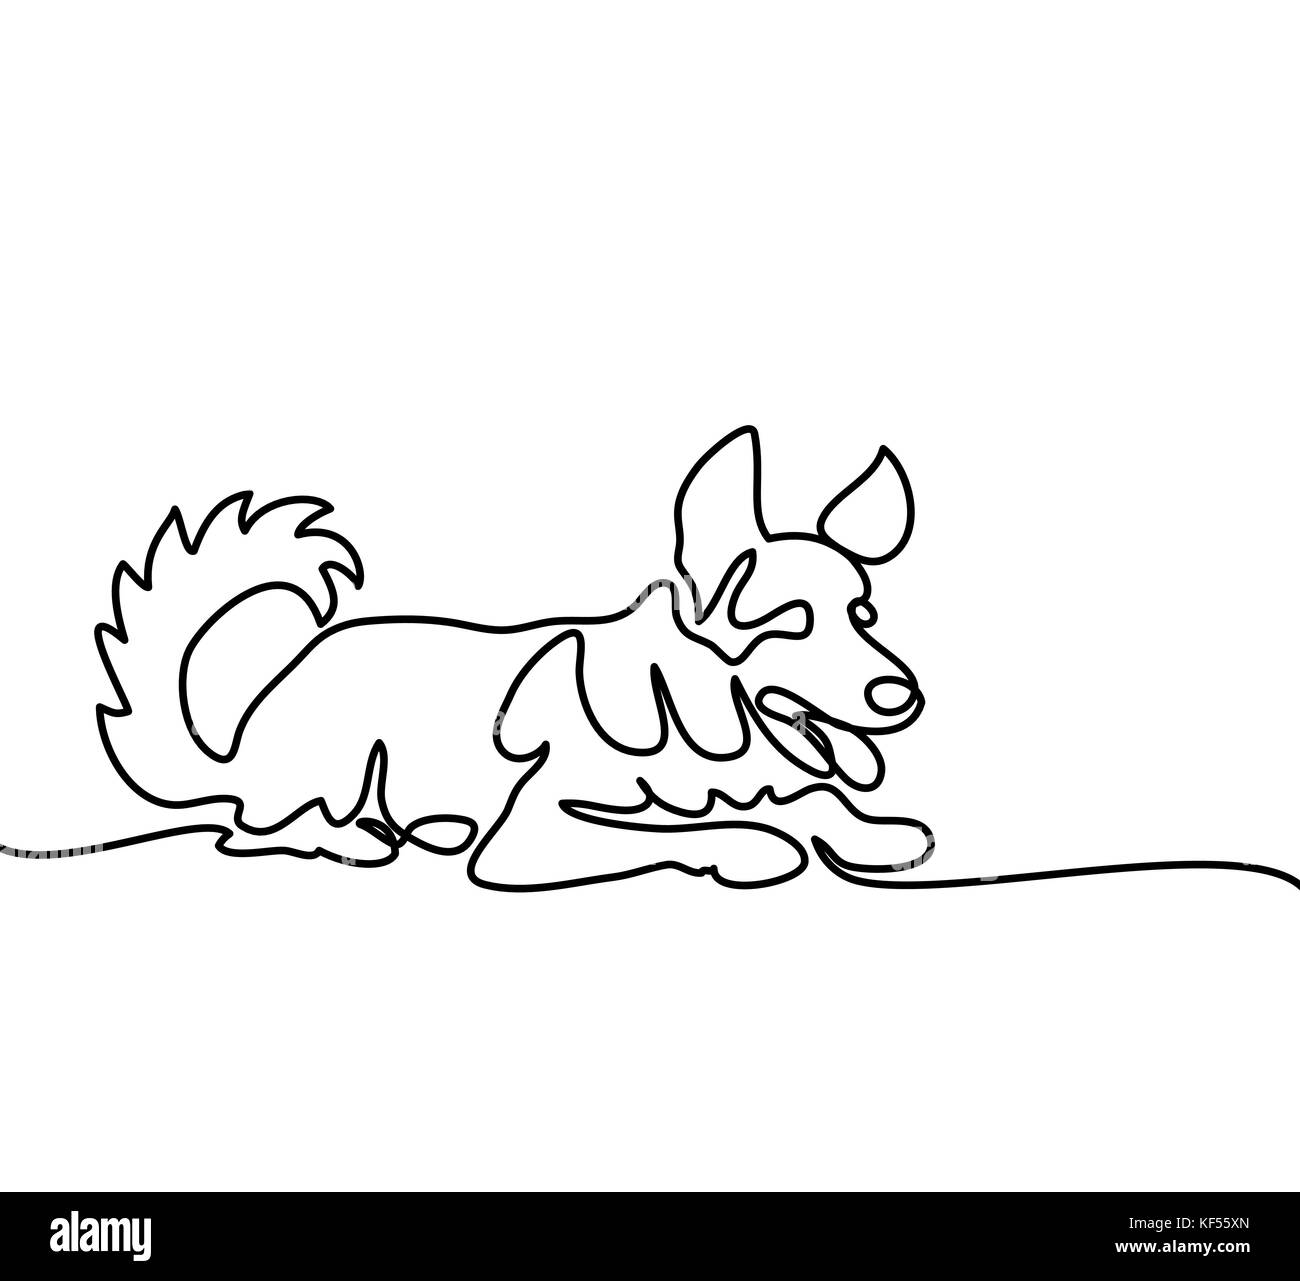 Continuous line drawing. Sheep dog lies. Vector illustration Stock Vector